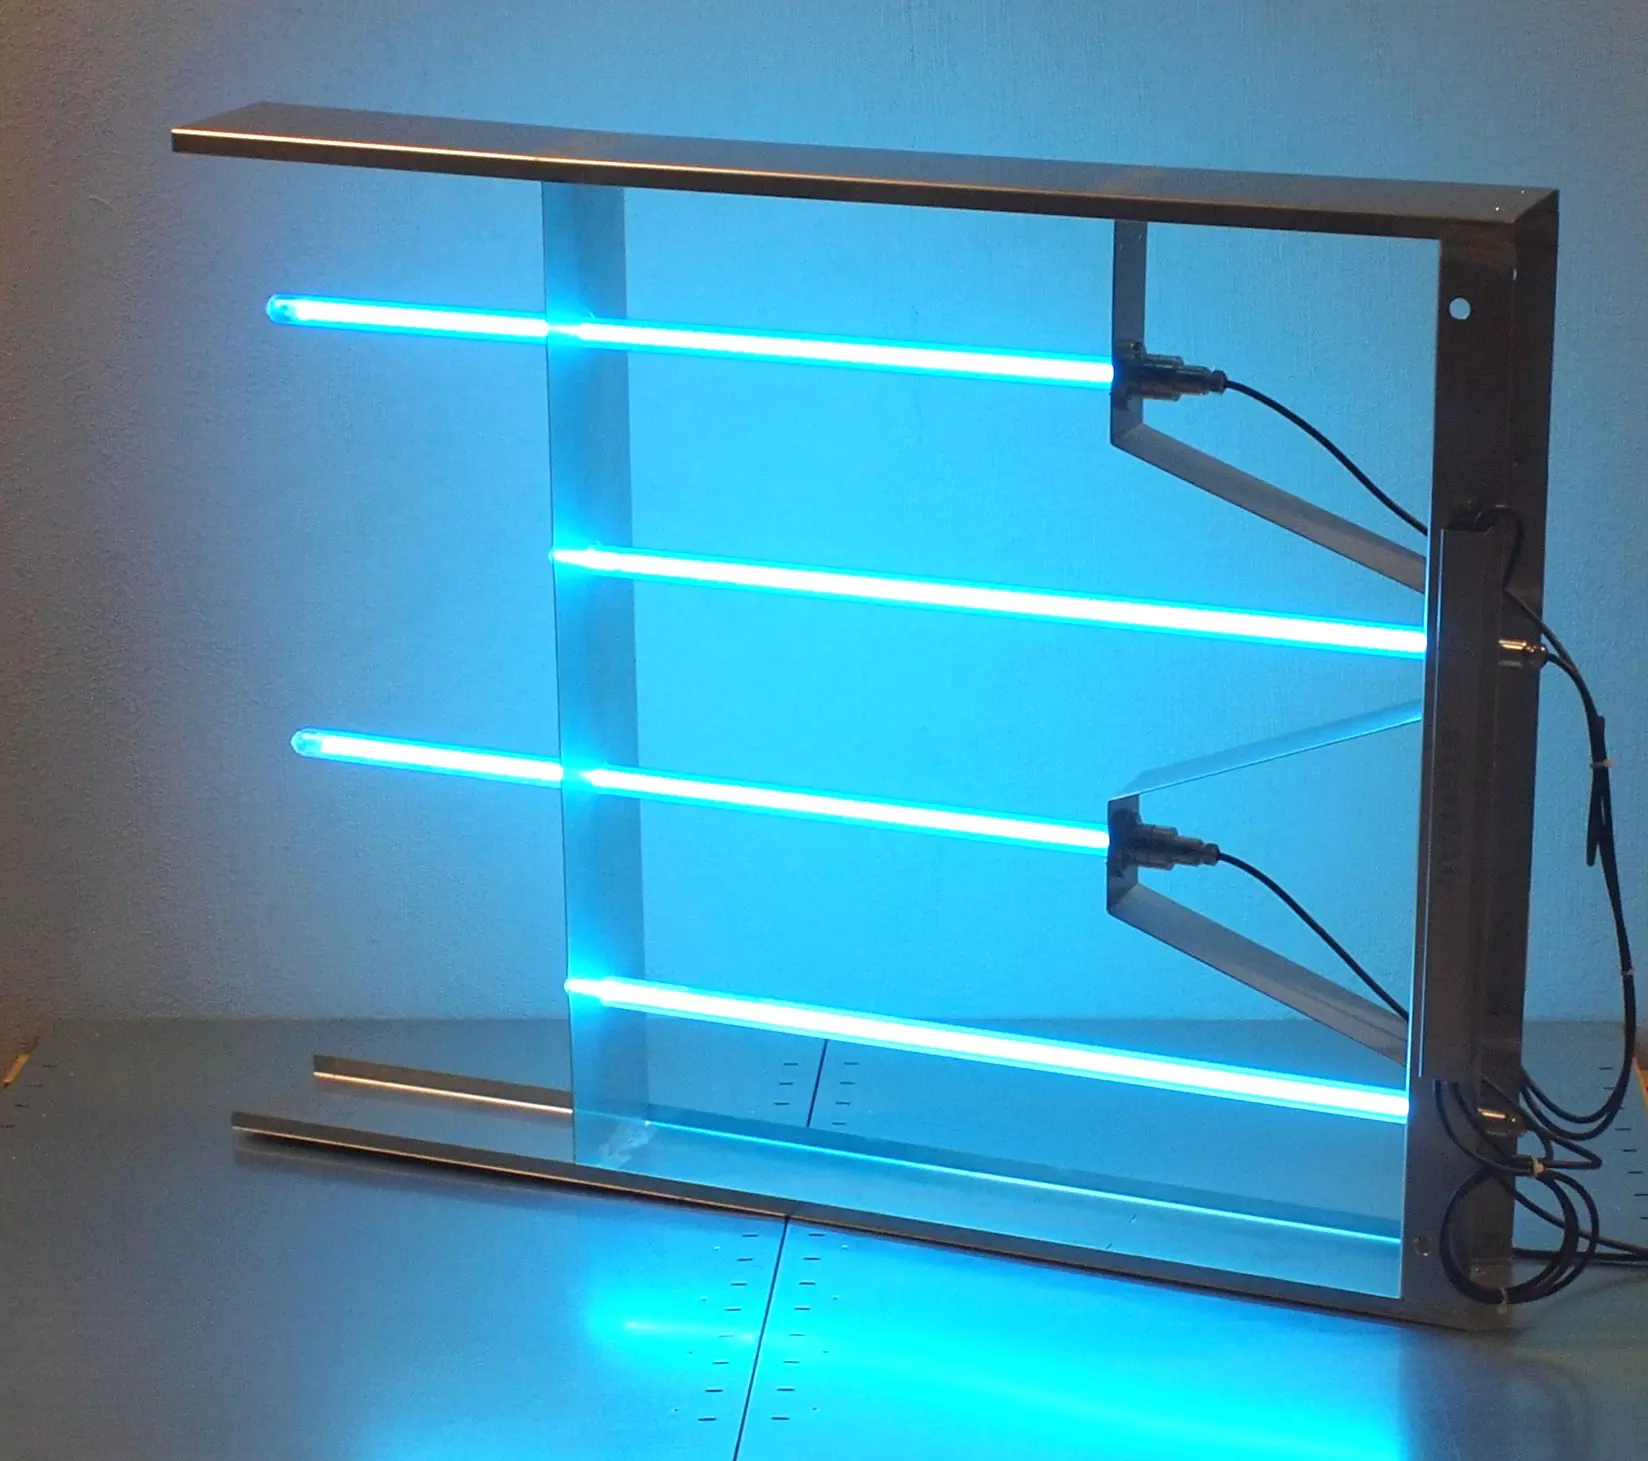 Example design of UVC lamps in a movable stainless steel frame, for AHU’s with little space